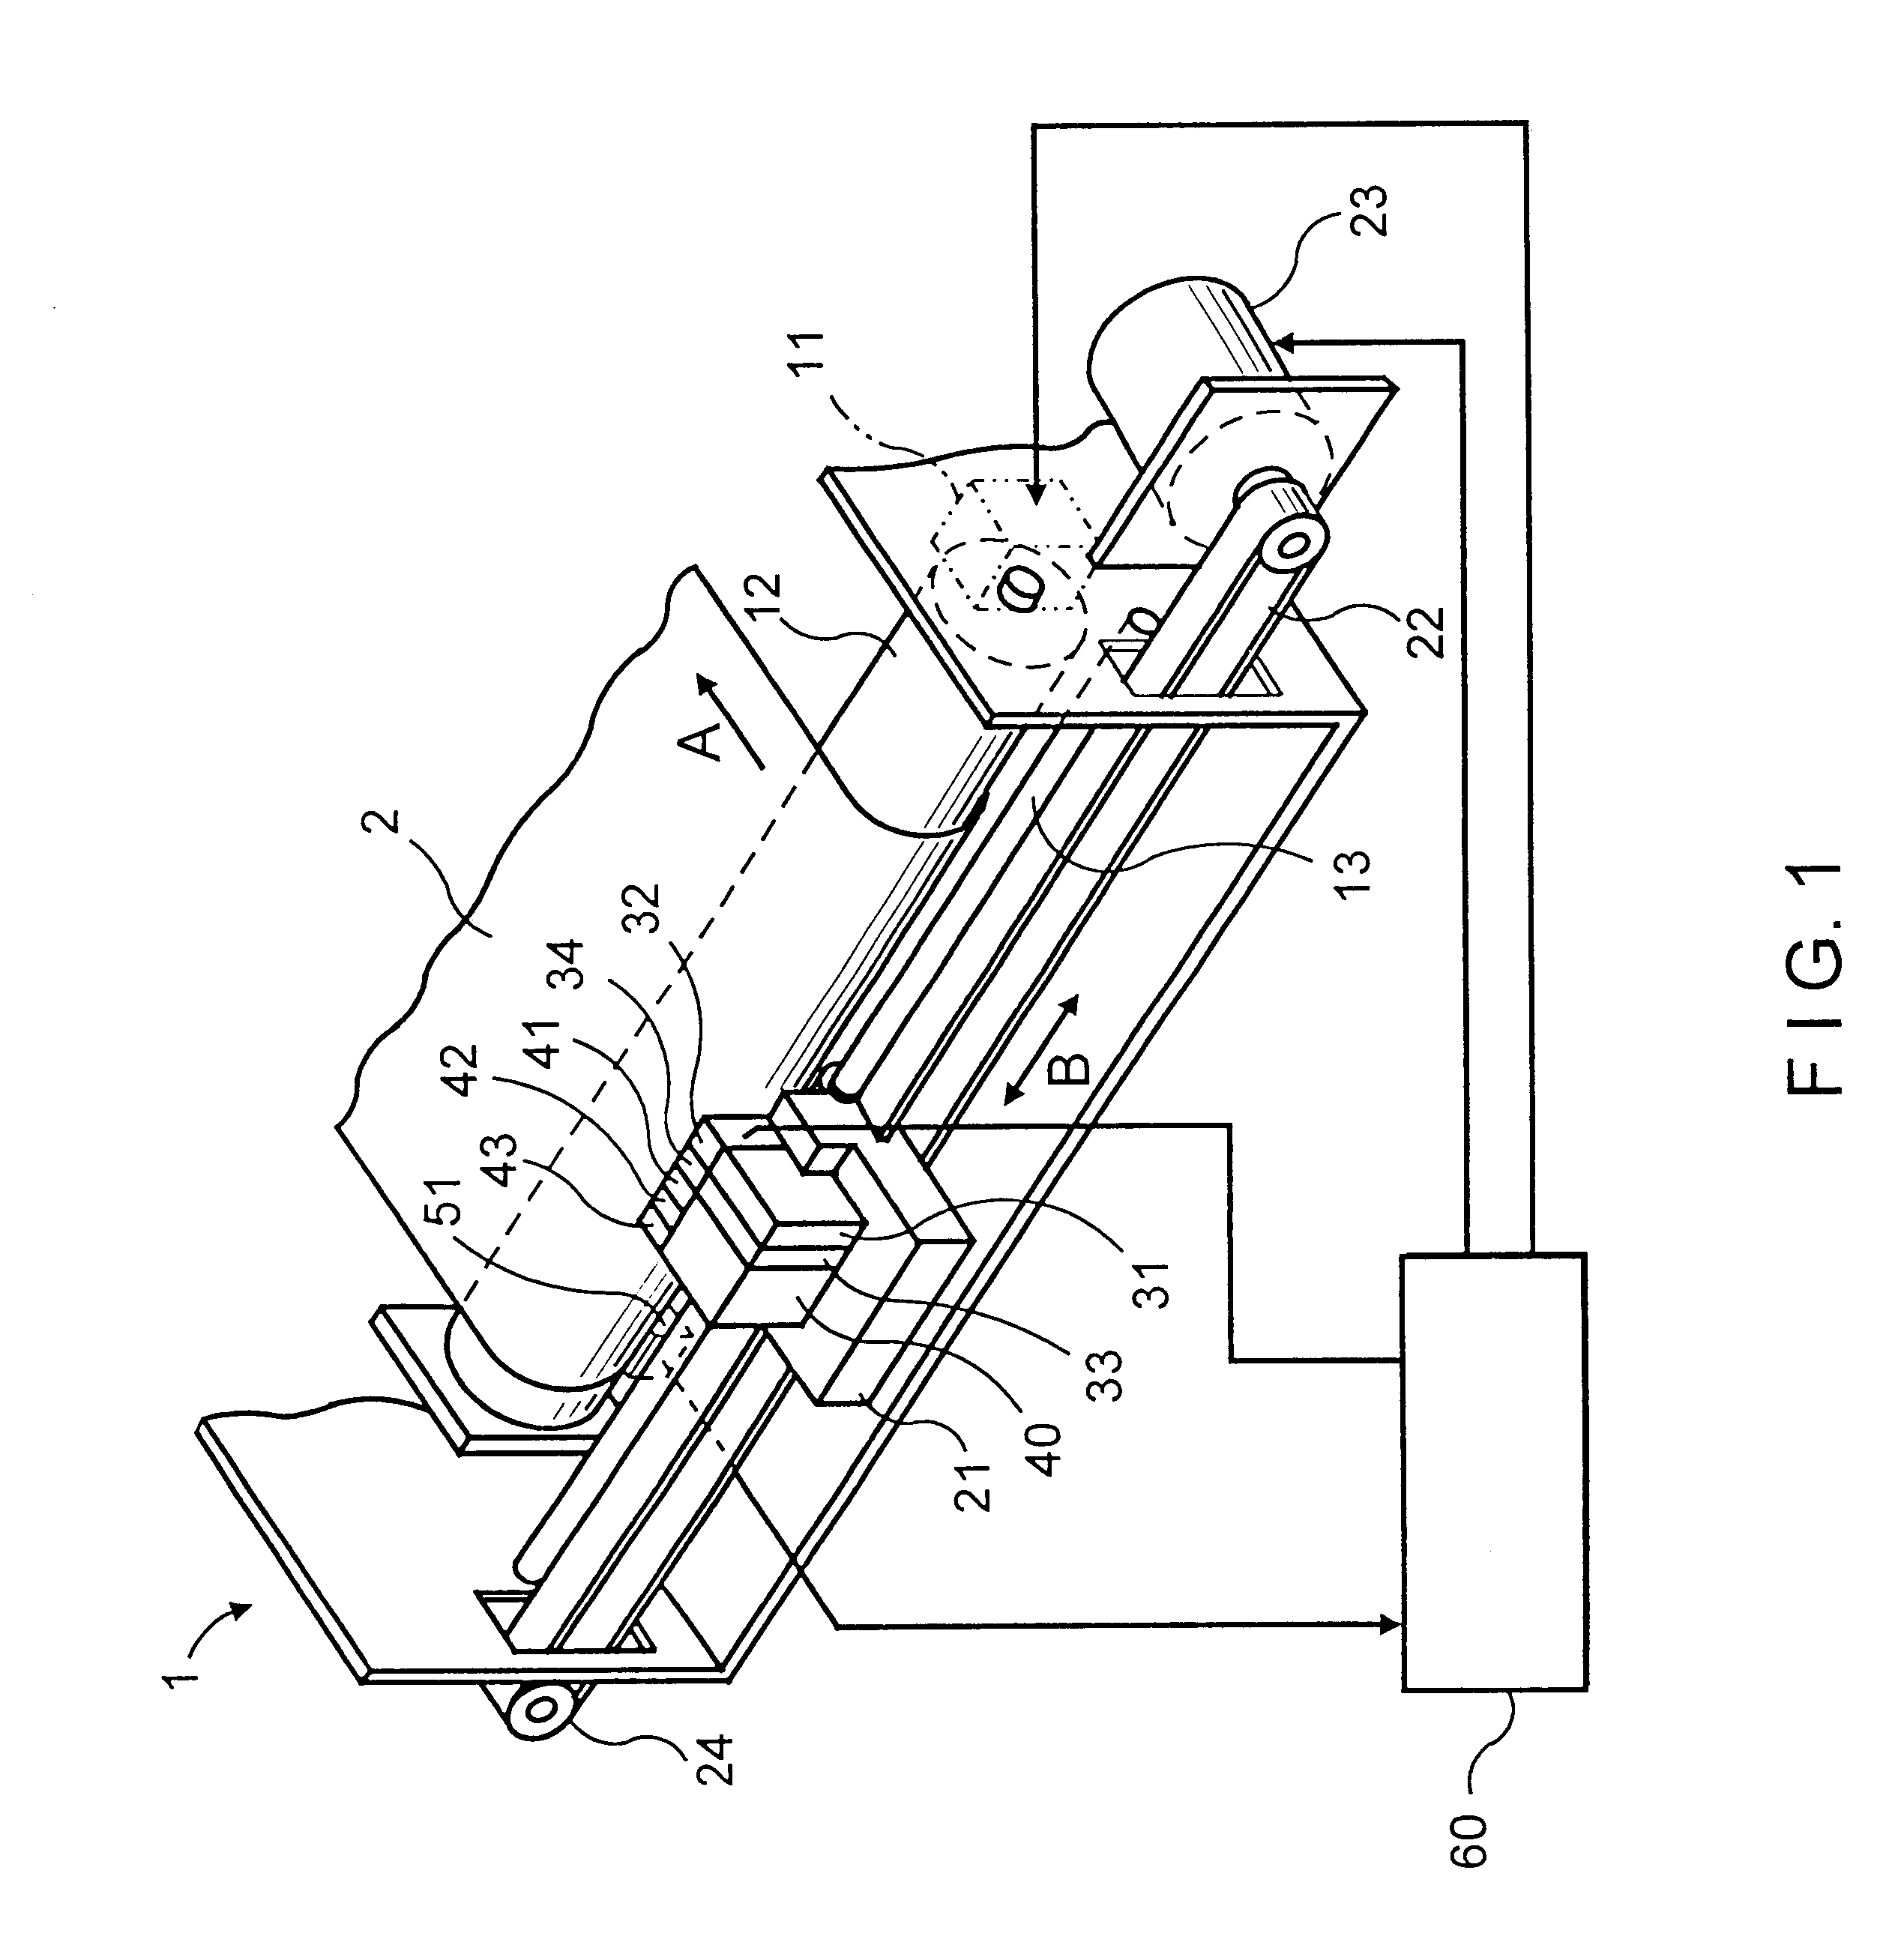 Ink jet recording method and apparatus for forming an image on either plain paper or a specialty recording medium